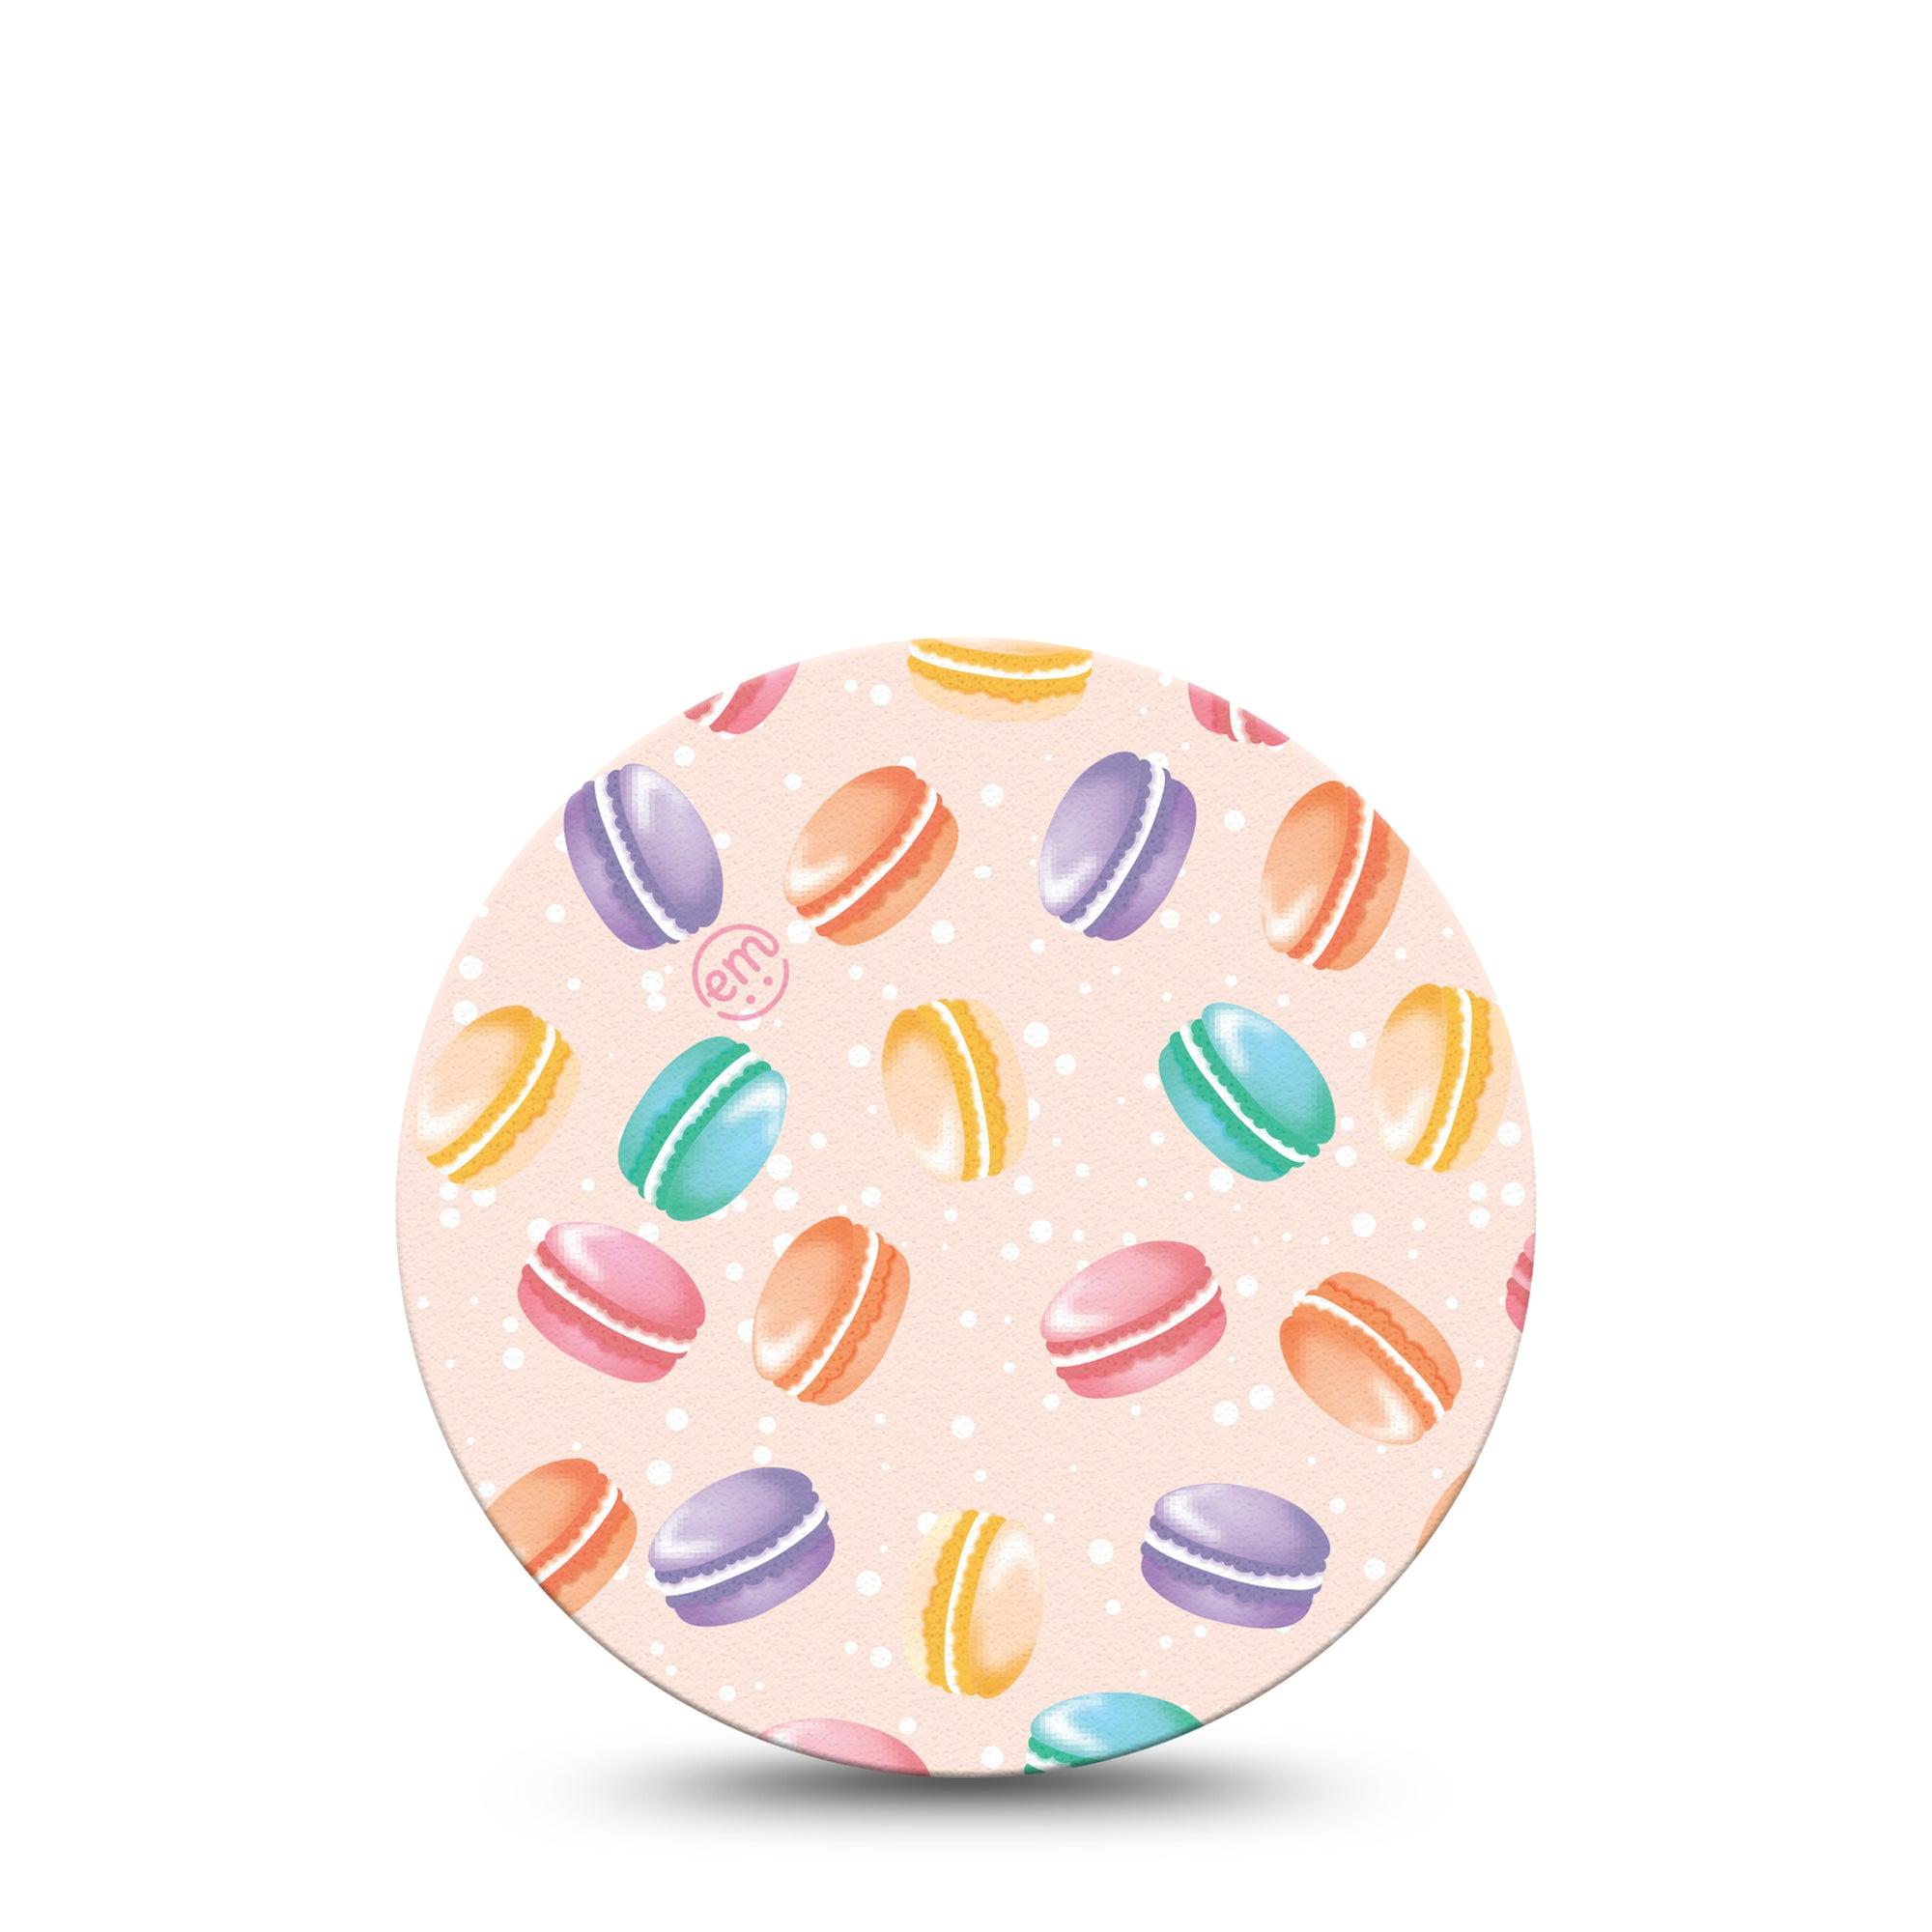 ExpressionMed Macarons Libre 2 Overpatch, Single, Colorful Dessert Themed, CGM Plaster Tape Design